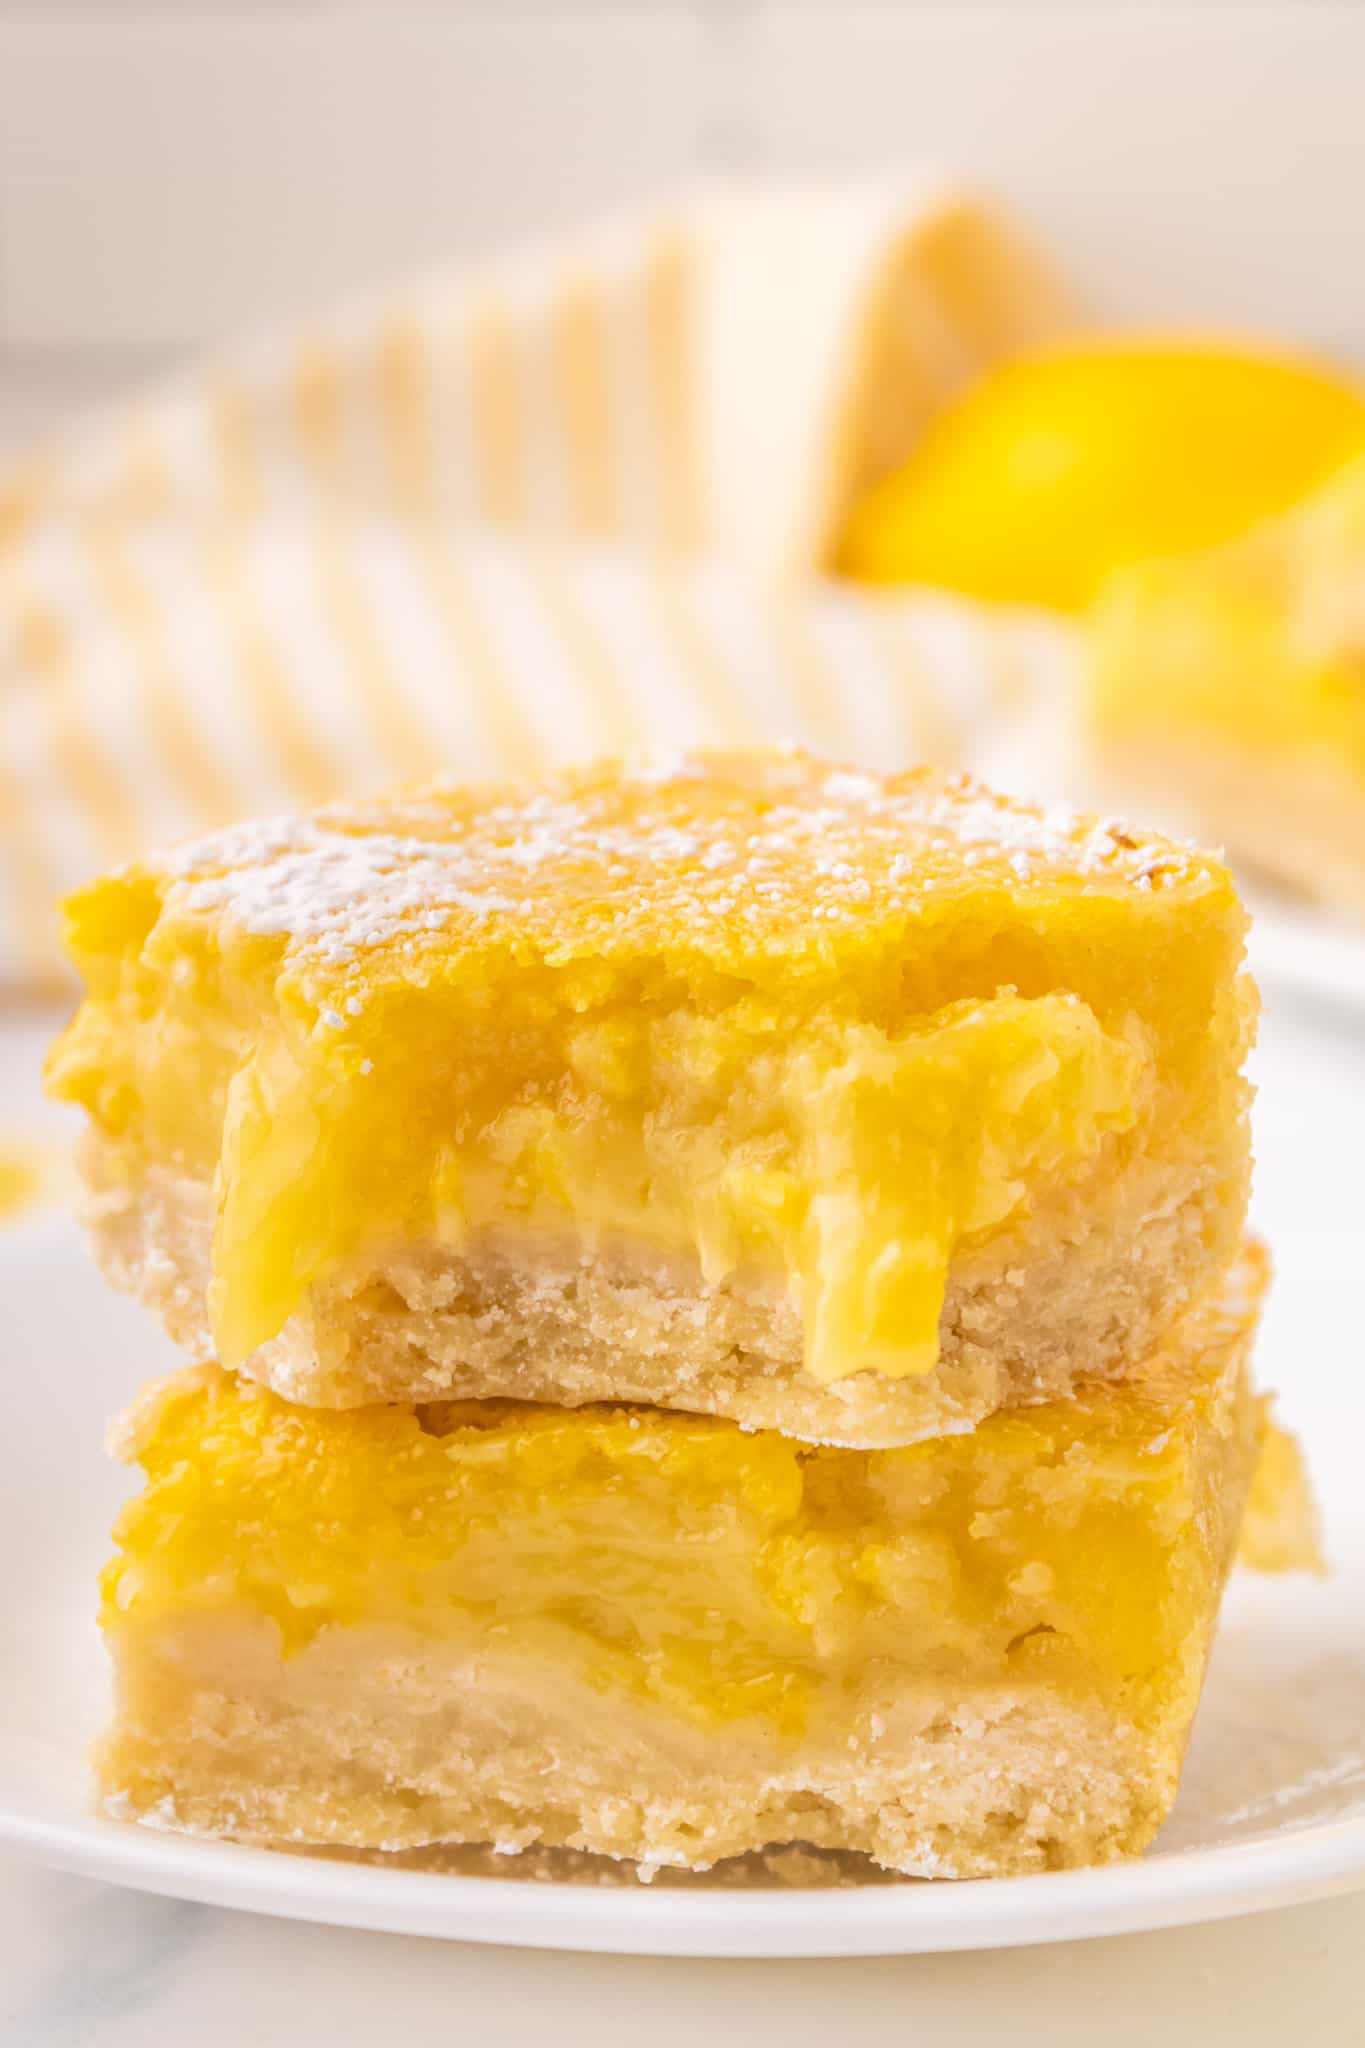 Lemon Bars are a decadent dessert with a shortbread like base topped with a smooth, rich lemon layer.